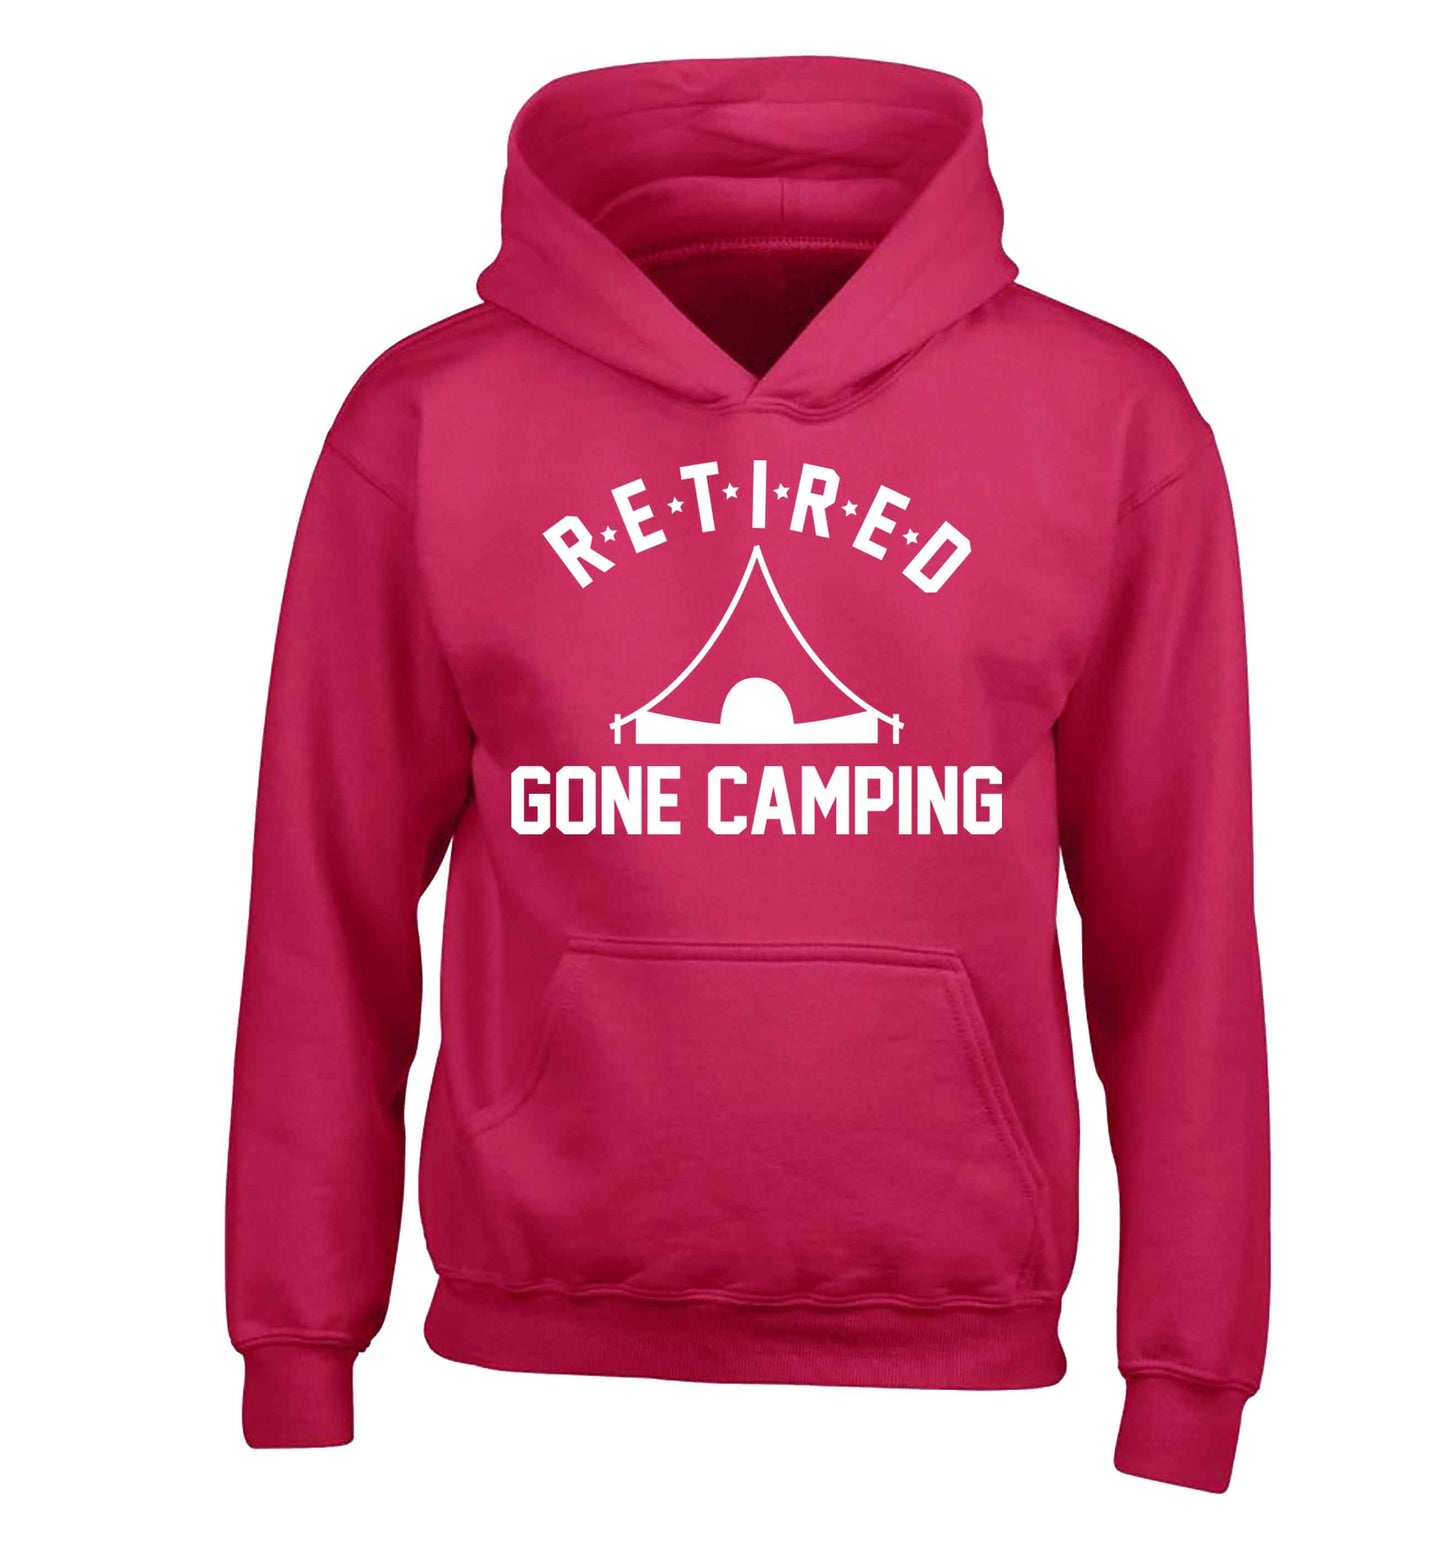 Retired gone camping children's pink hoodie 12-13 Years